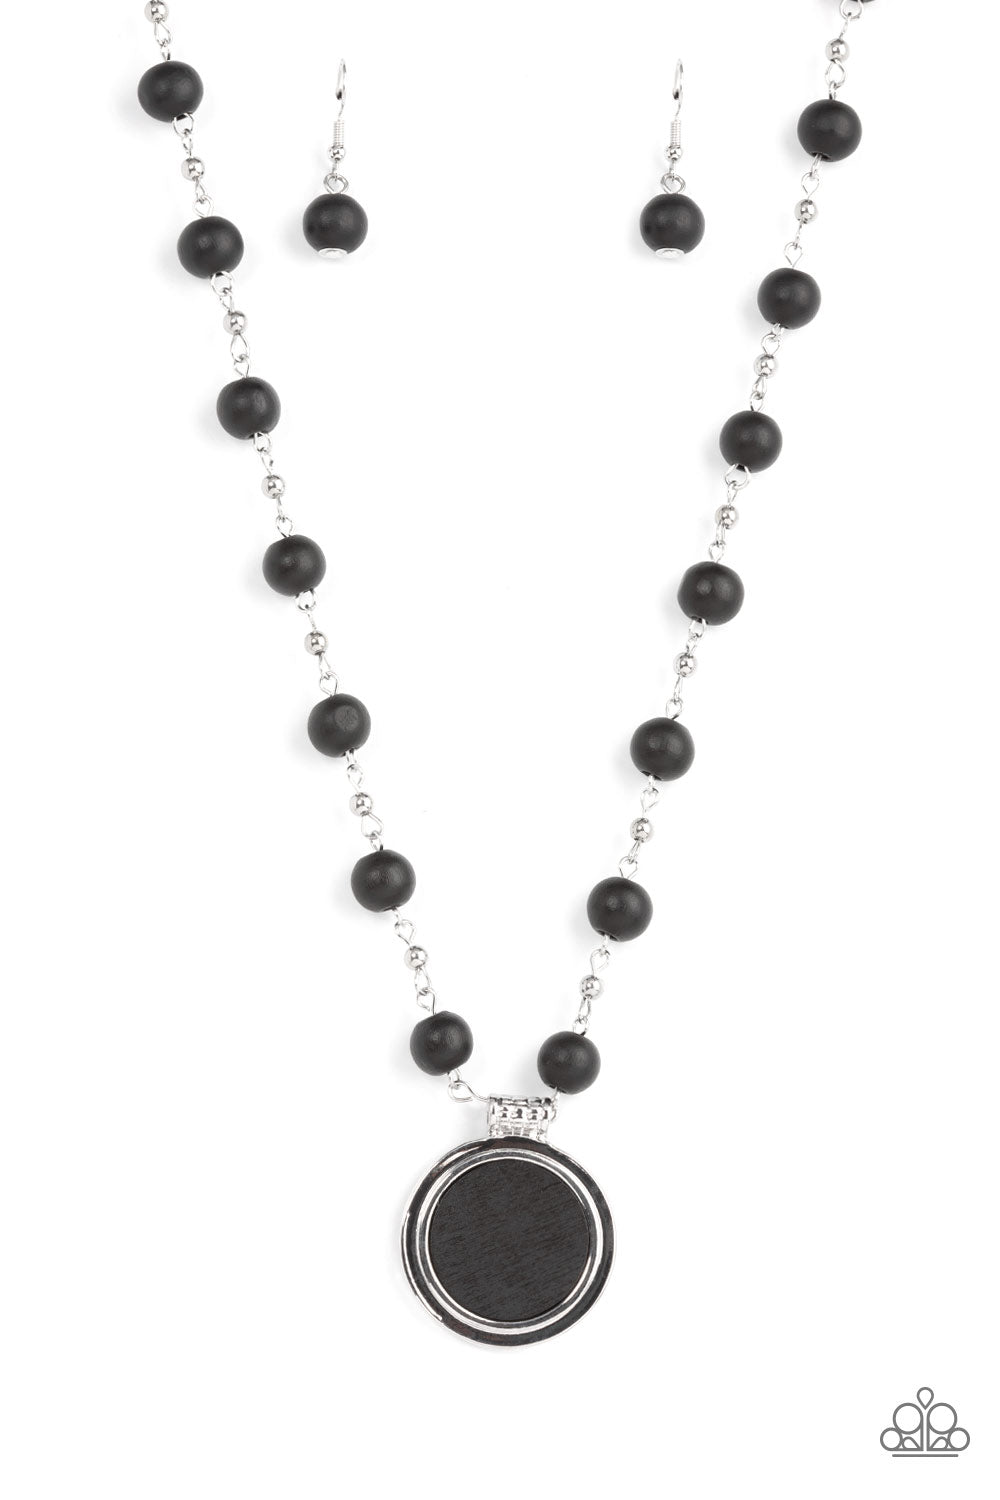 Soulful Sunrise Black Necklace - Paparazzi Accessories  Infused with dainty silver chains, a collection of black wooden beads link into an earthy chain below the collar. Featuring a textured silver fitting, a flat black wooden disc is pressed into a silver frame, resulting in a naturally refined pendant. Features an adjustable clasp closure.  Sold as one individual necklace. Includes one pair of matching earrings.